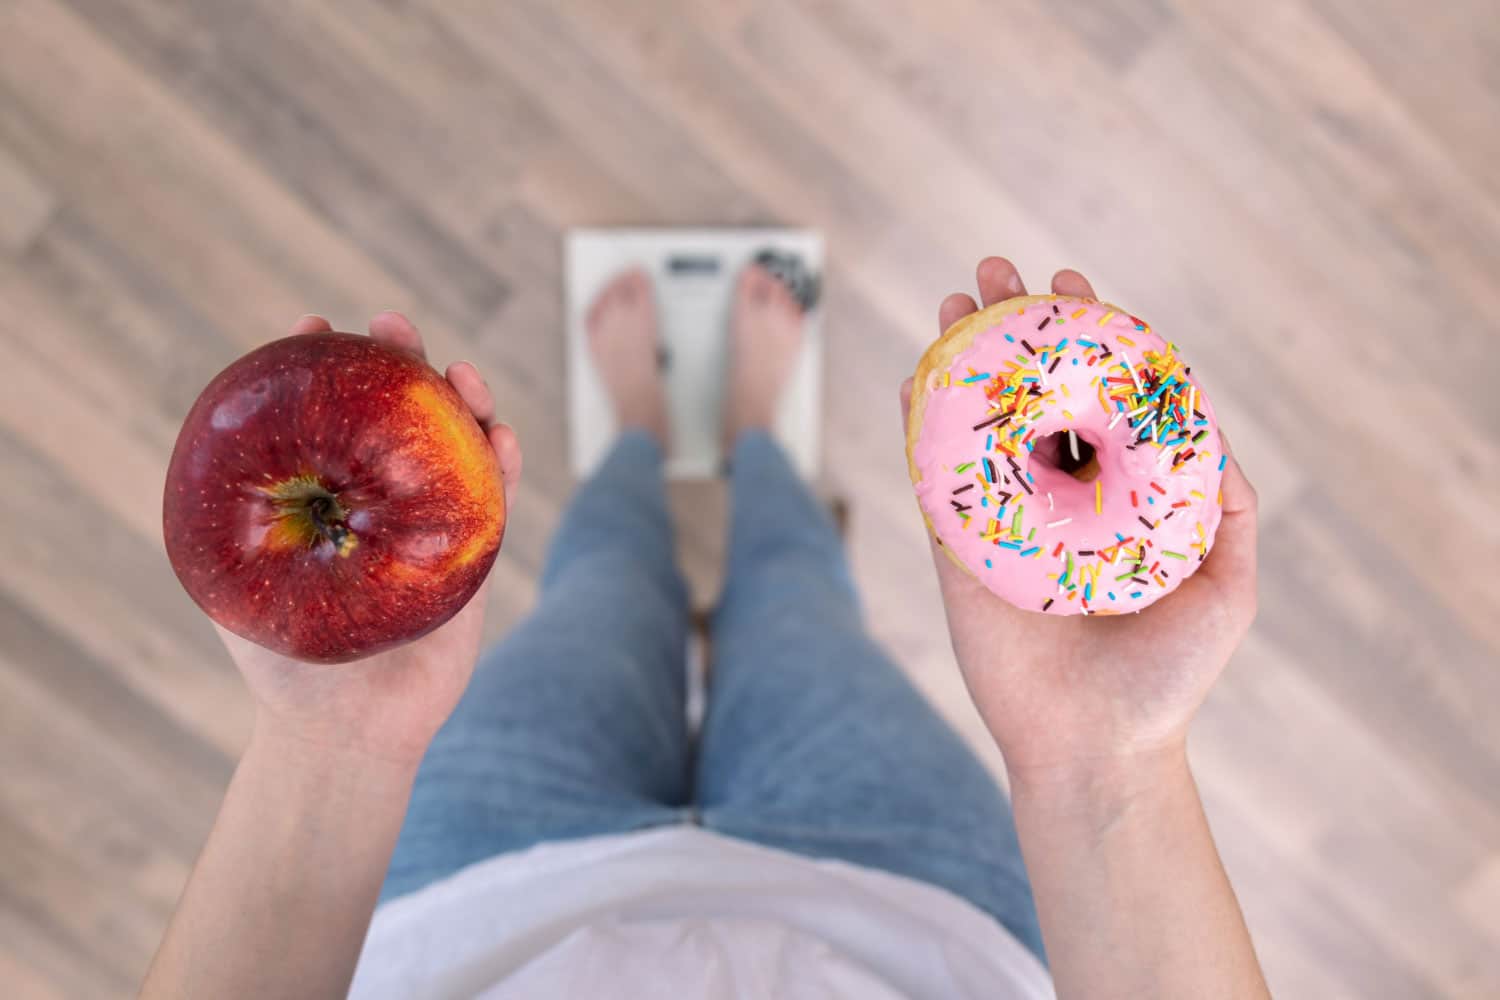 A woman stands on the scales, holds a donut and an apple in her hands, the concept of diet, weight gain, weight loss